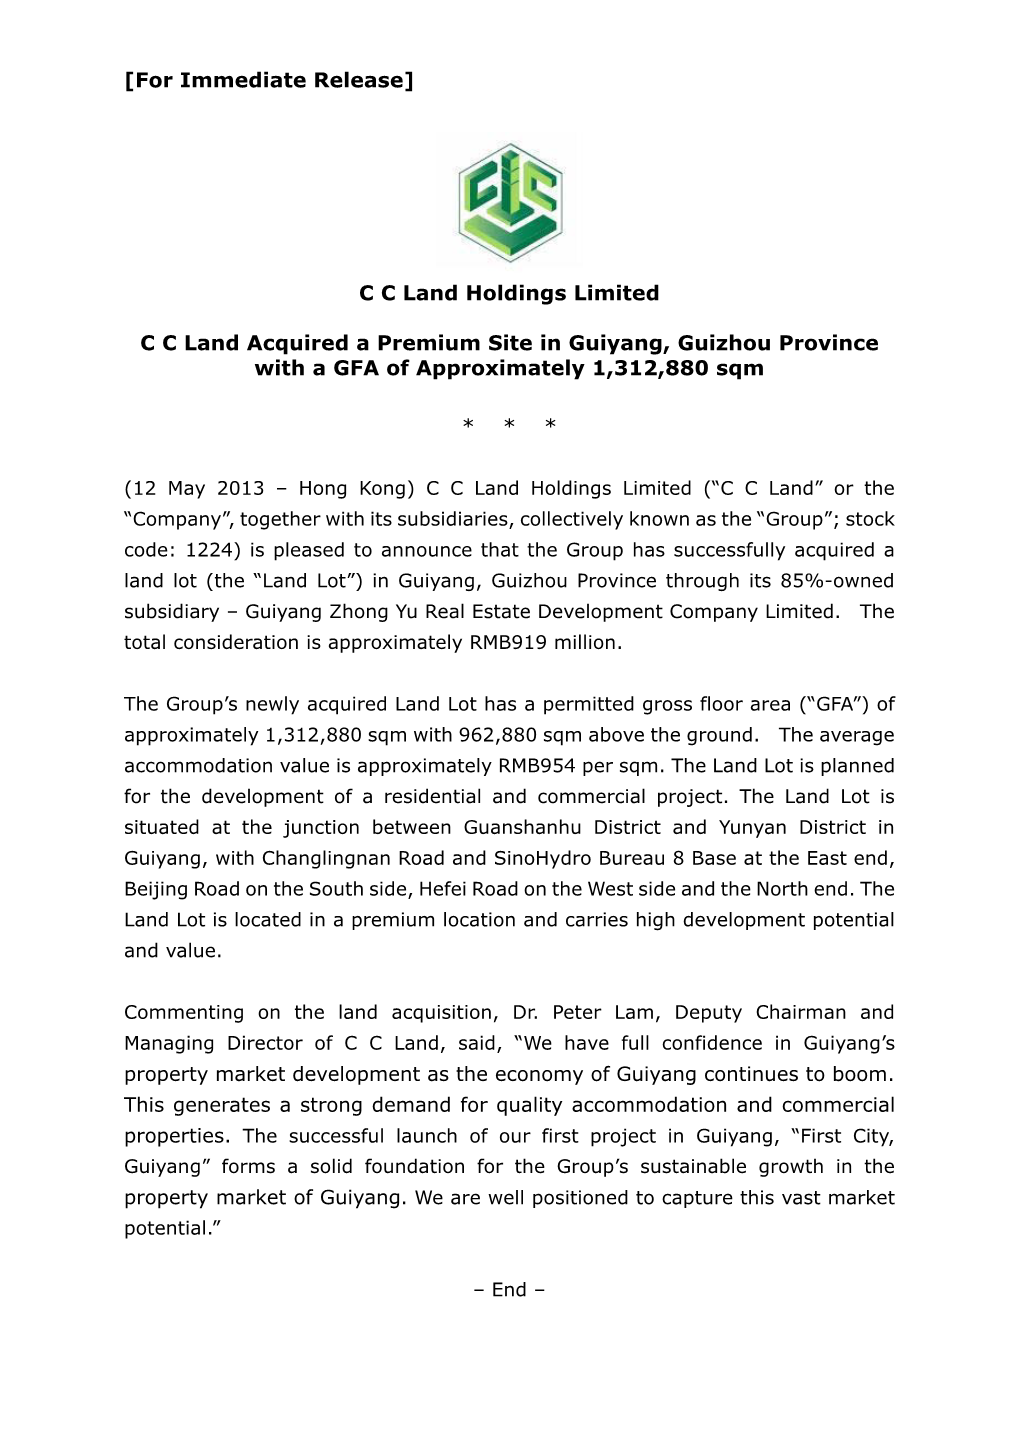 CC Land Holdings Limited CC Land Acquired a Premium Site In